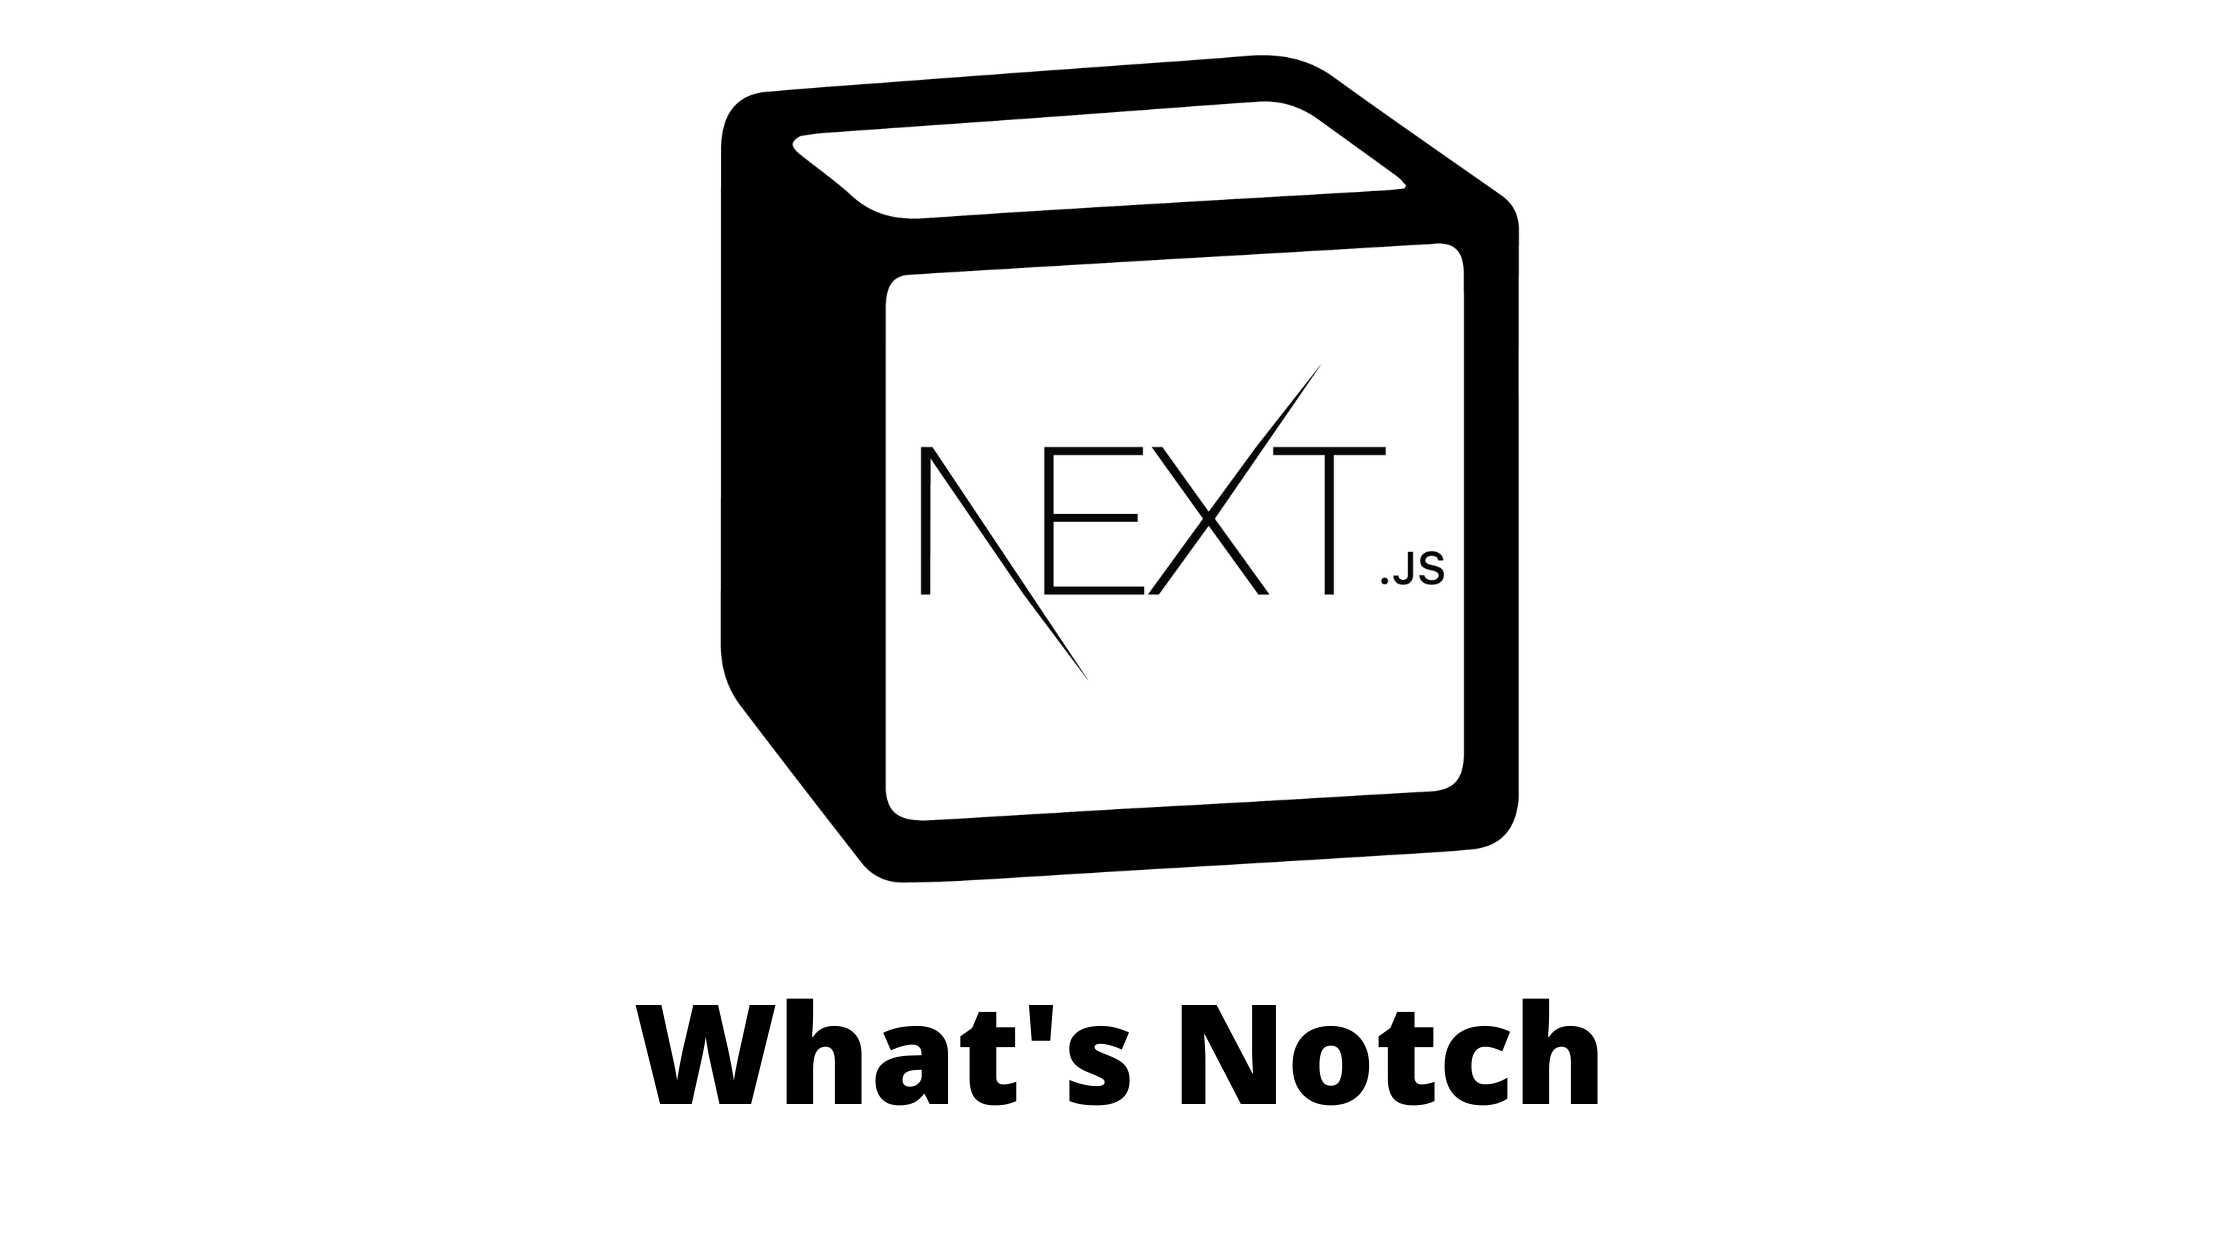 What is Notch